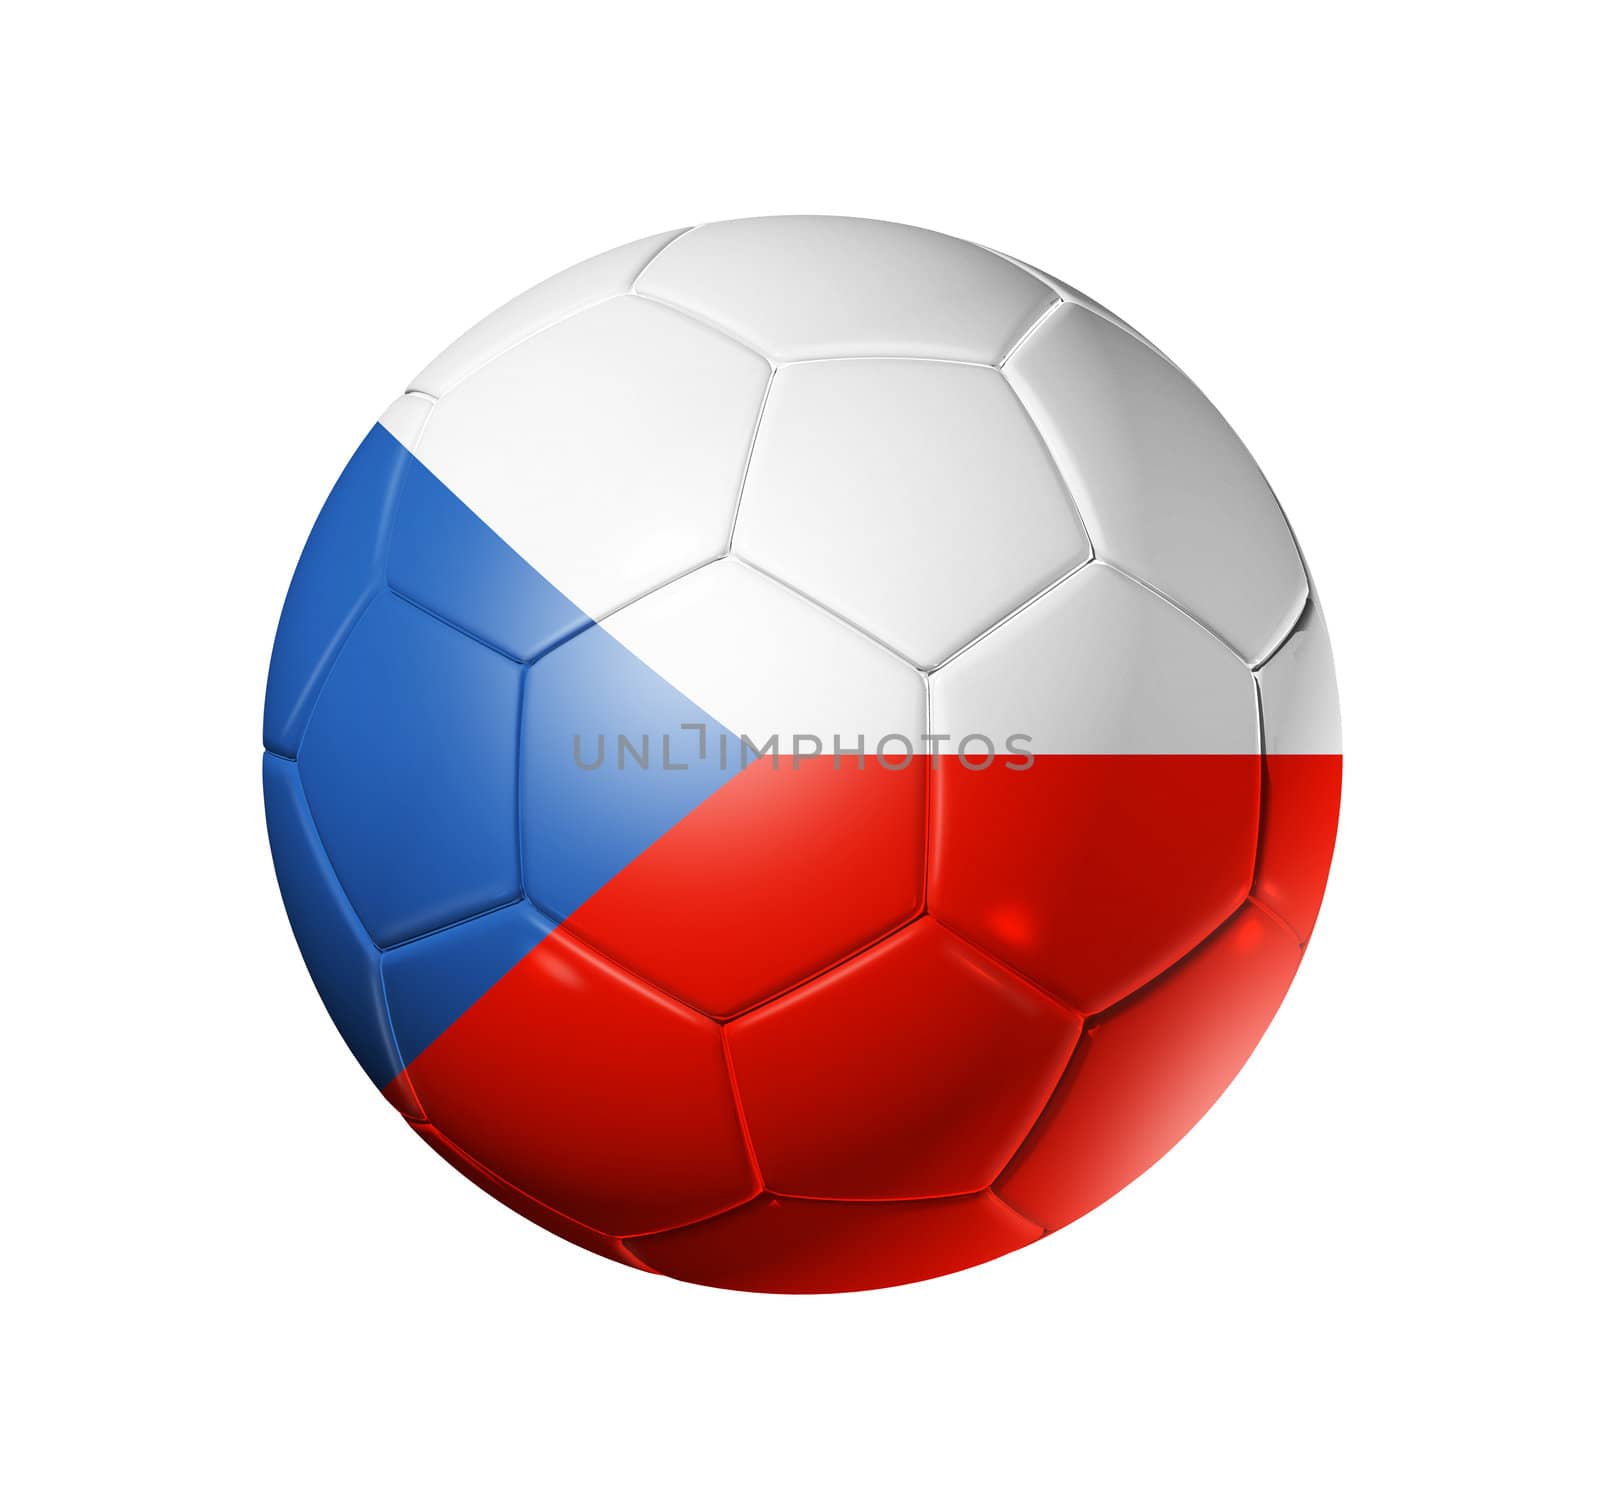 3D soccer ball with Czechoslovakia / Czech Republic team flag, world football cup 2010. isolated on white with clipping path